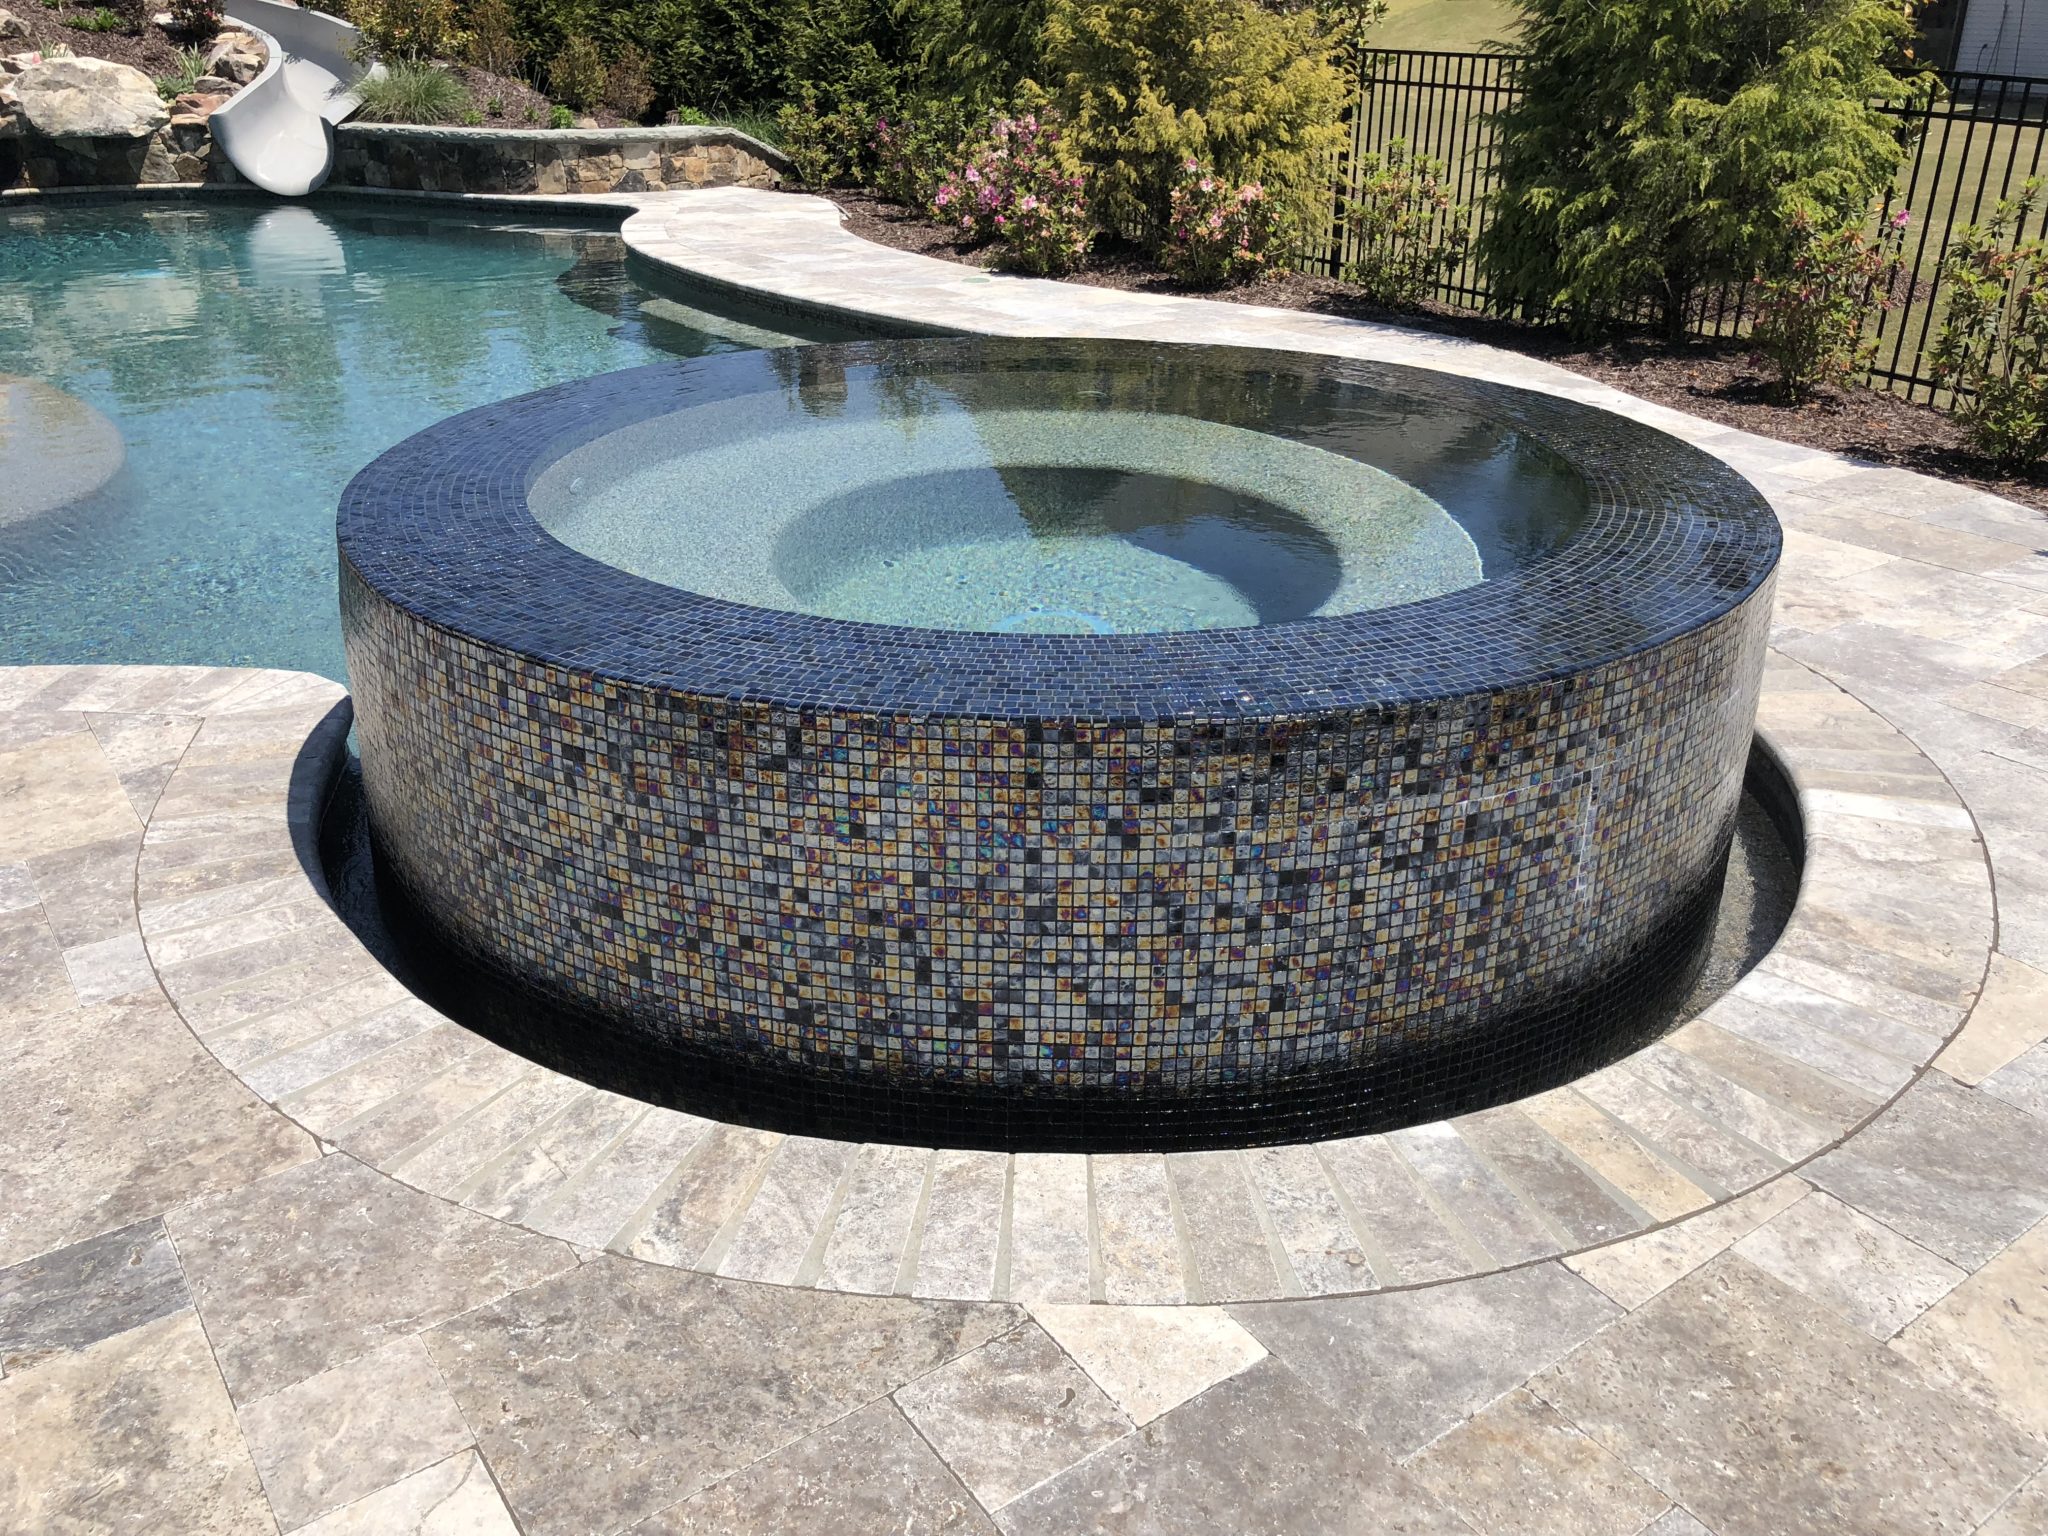 An elevated circular spa adorned with intricate multicolor tile, water cascading from all sides.